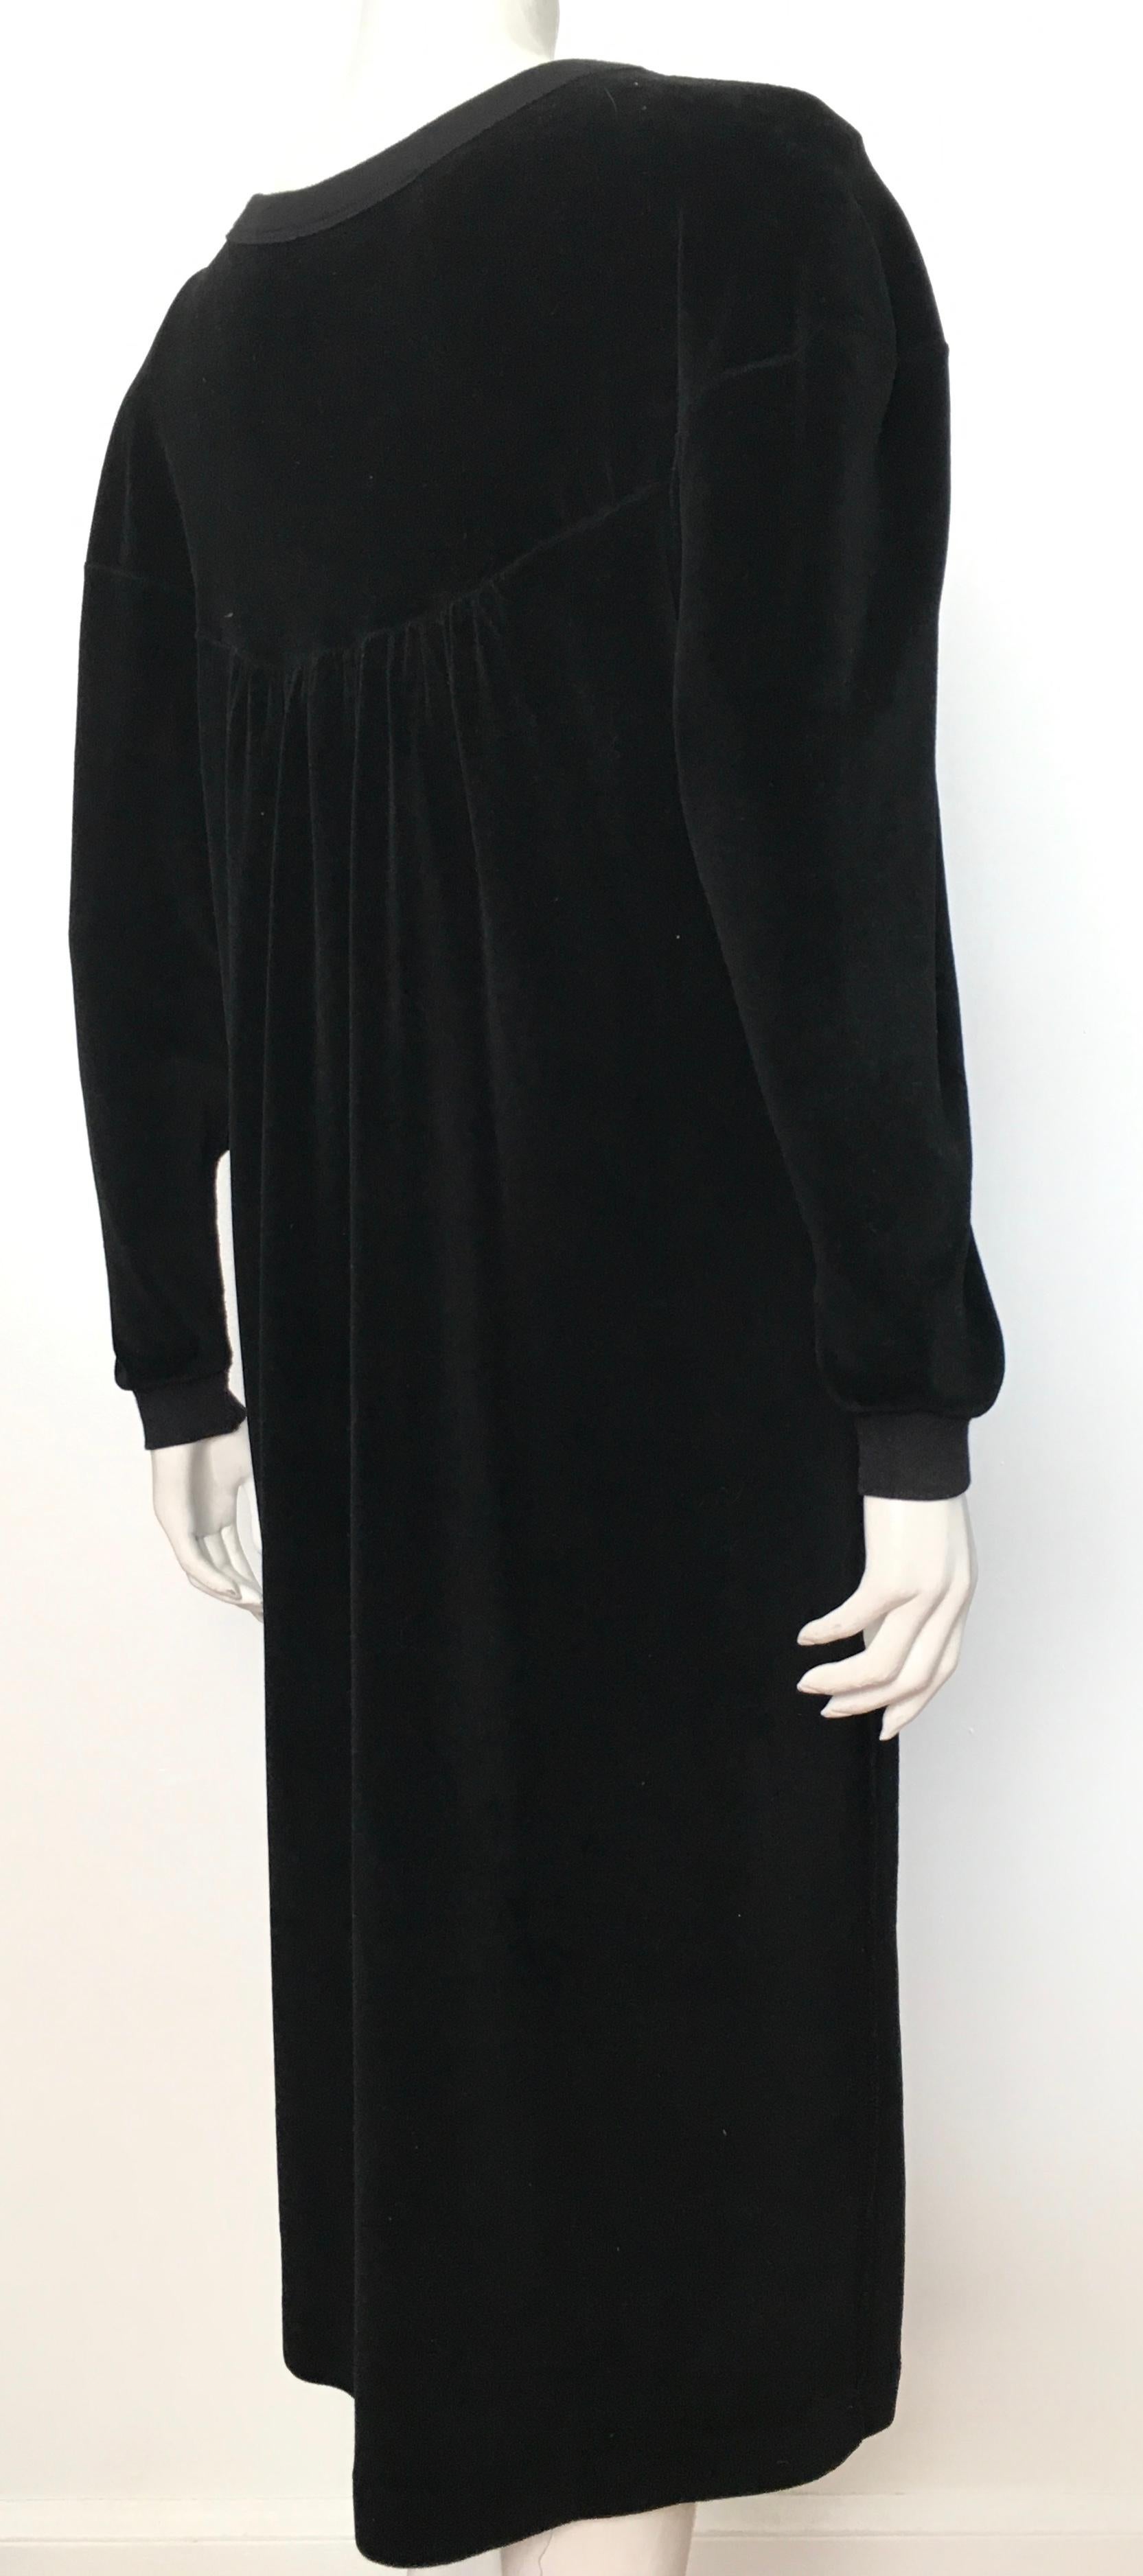 Sonia Rykiel 1980s Black Velour Dress with Pockets & Cardigan Size Large. For Sale 4